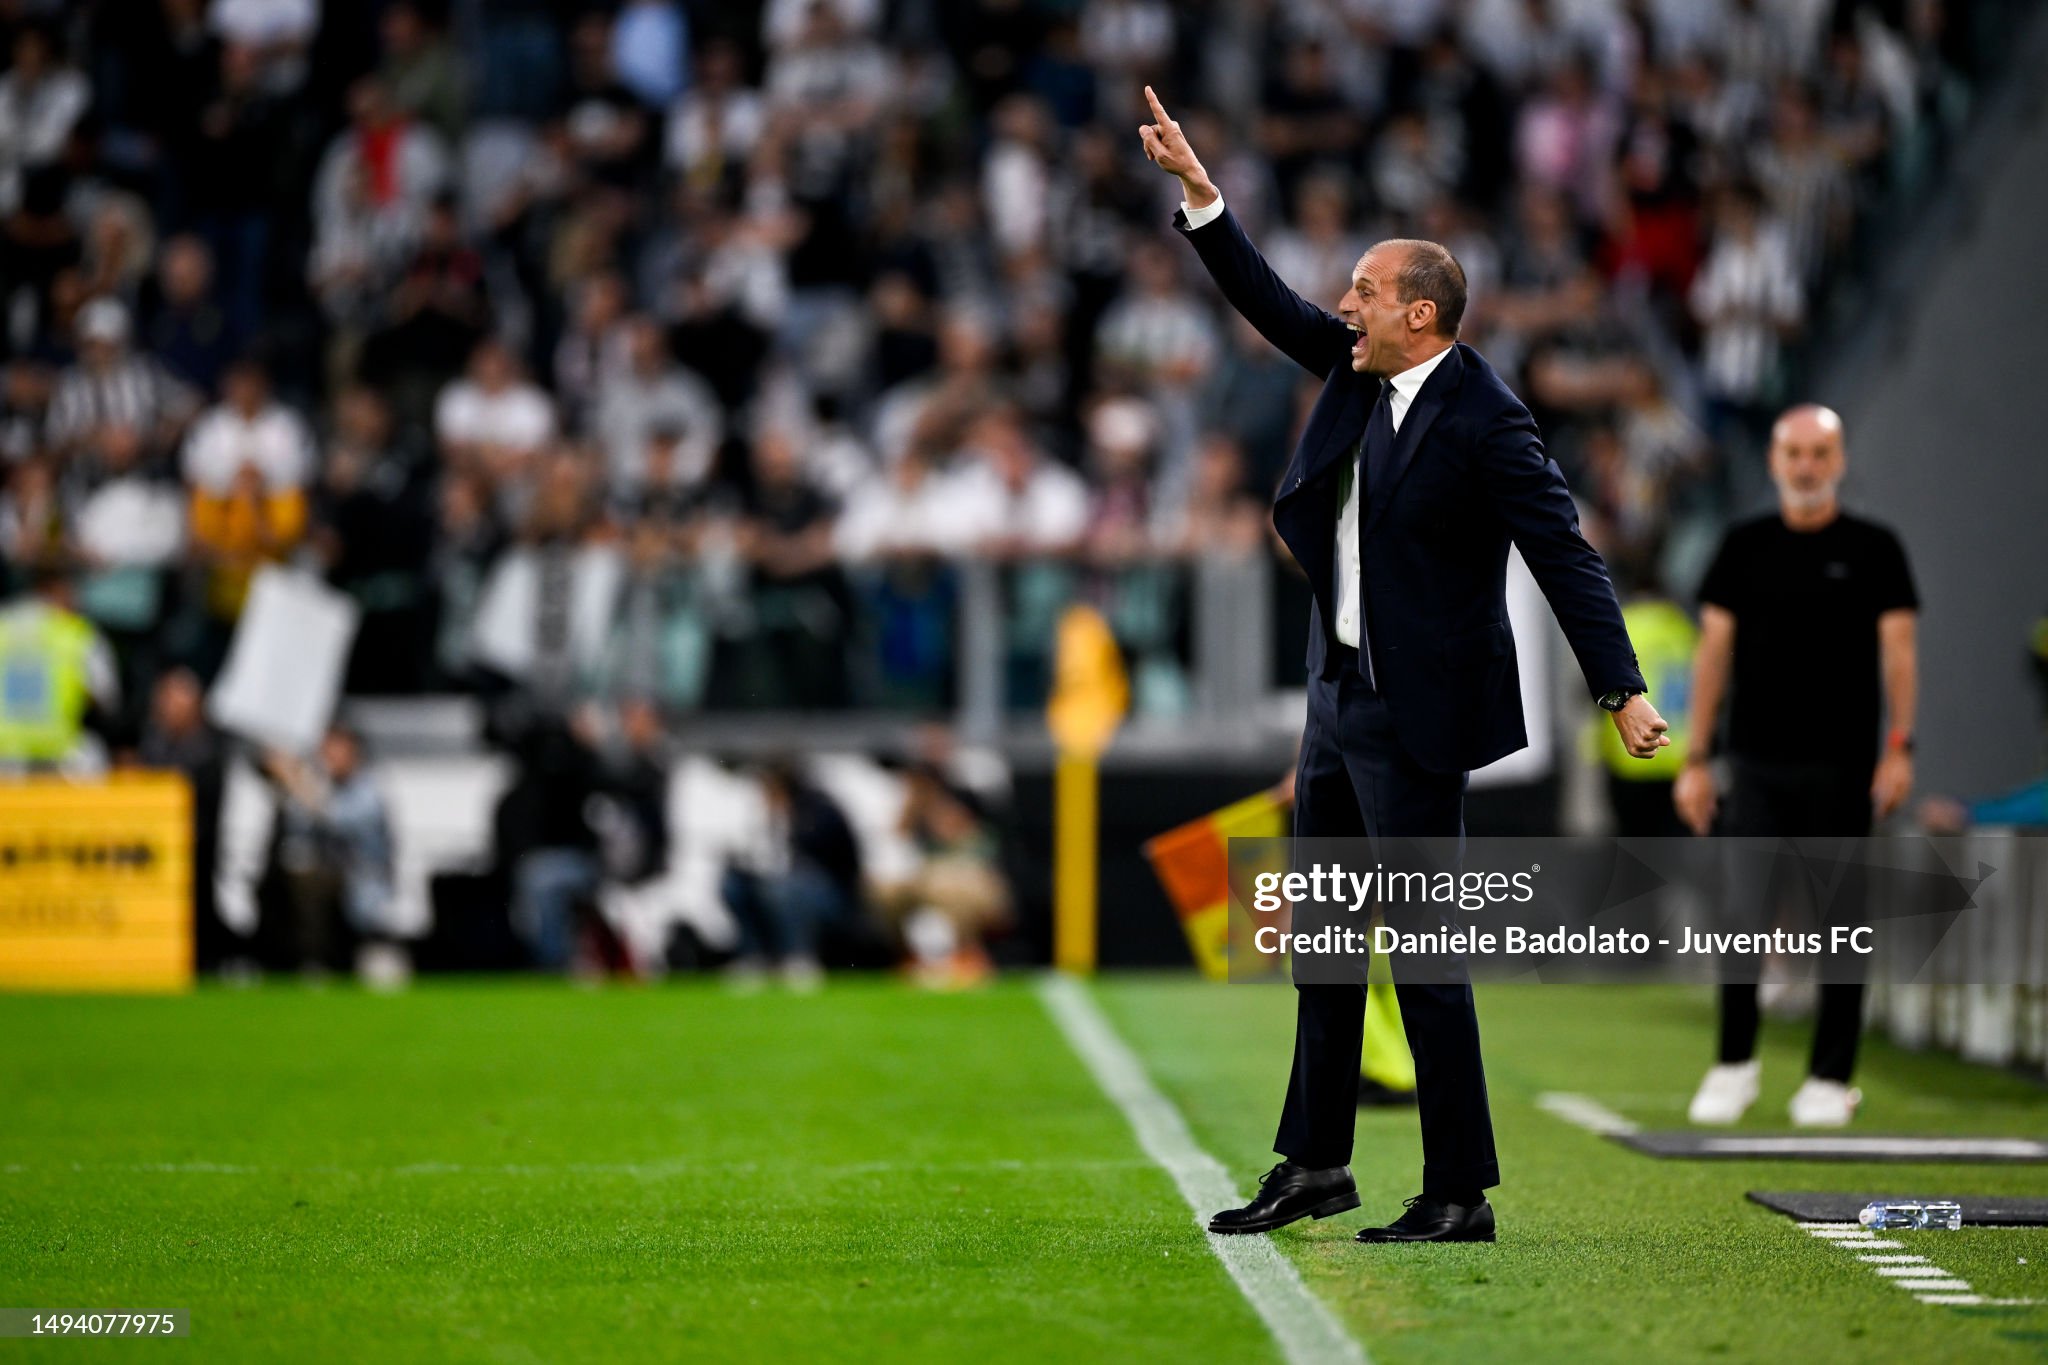 Allegri issues warning after completion of disastrous scenario for Juve